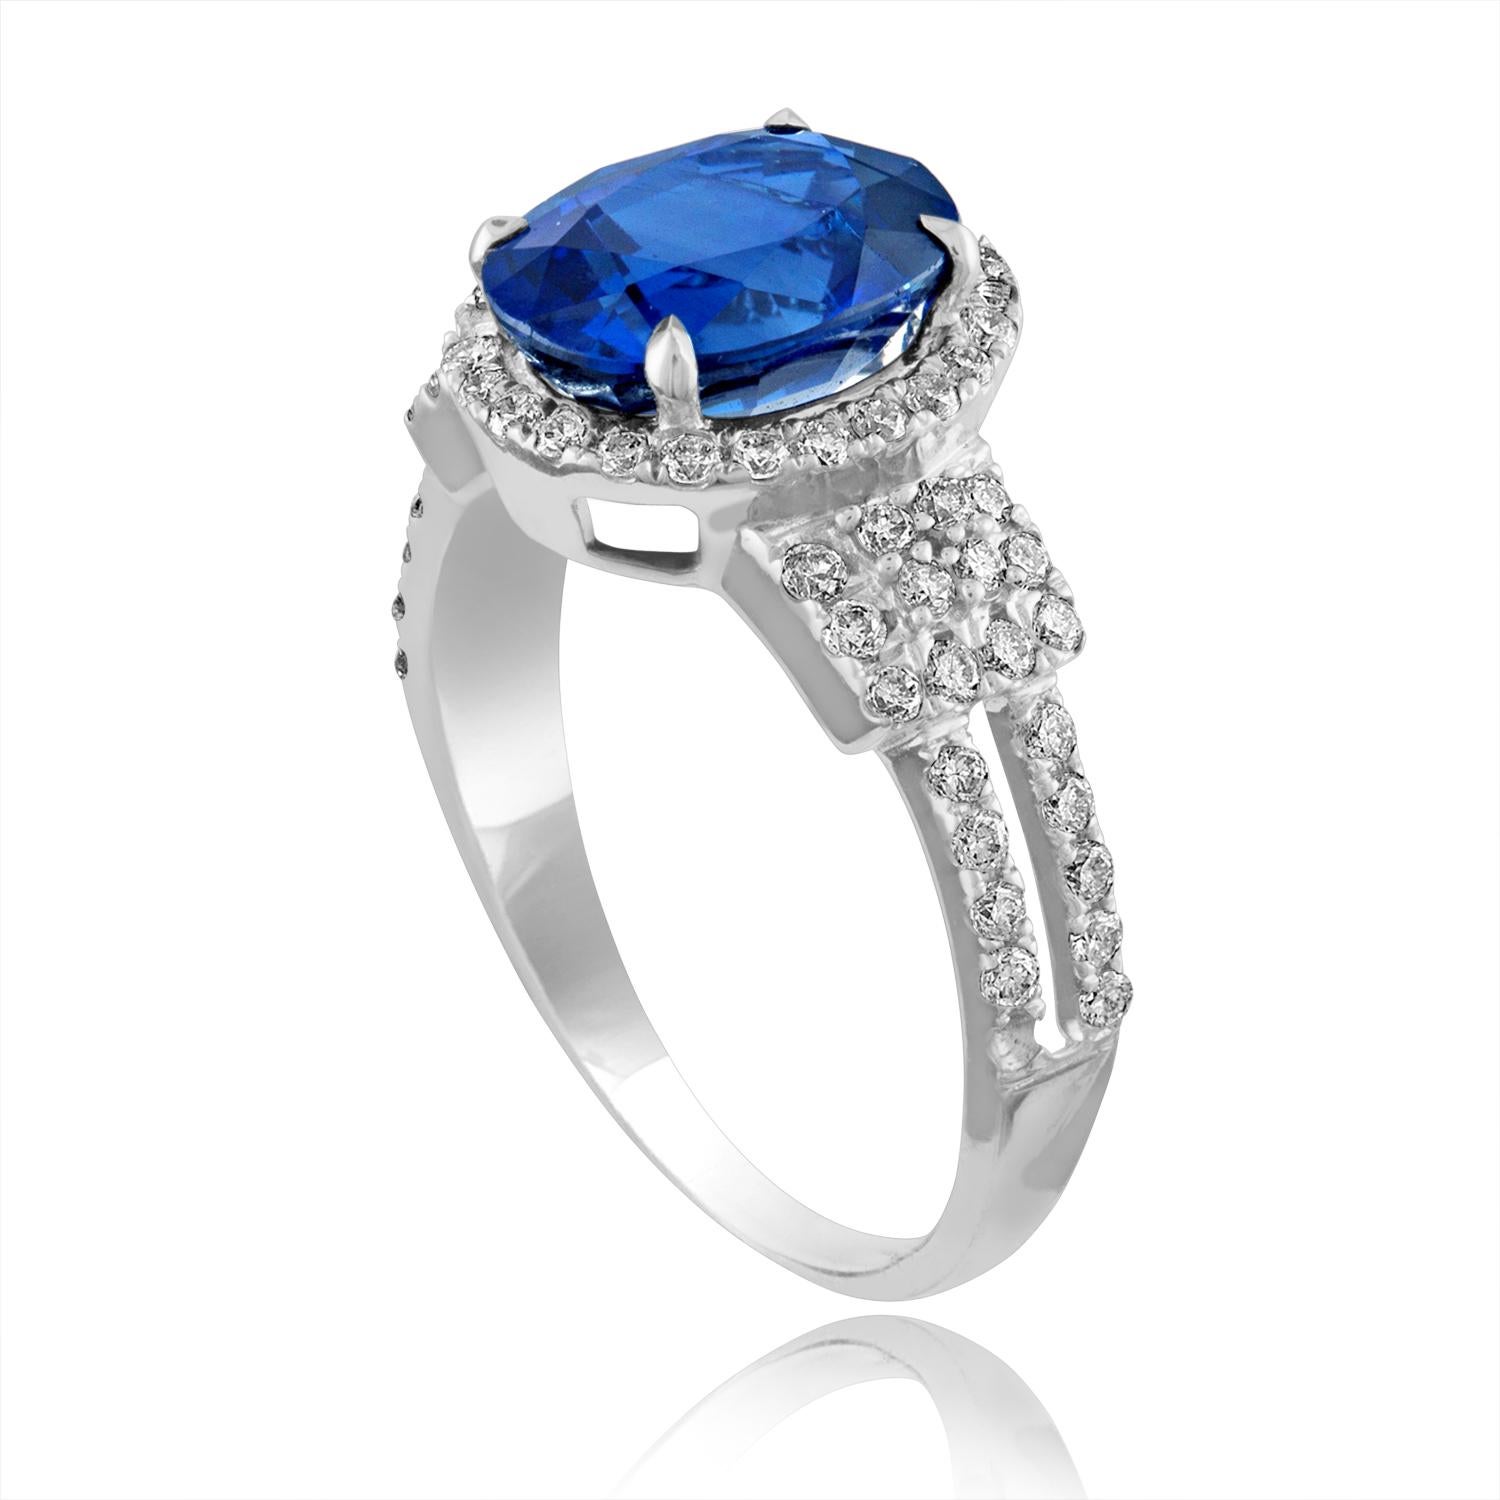 Classic Sapphire Halo Ring
The ring is 18K White Gold Ring
The center stone is Blue Sapphire 2.85 Carats
There are 0.53 ct of Diamonds F/G VS/SI
Ring size 5.50, sizable.
The ring weighs 3.1 grams
